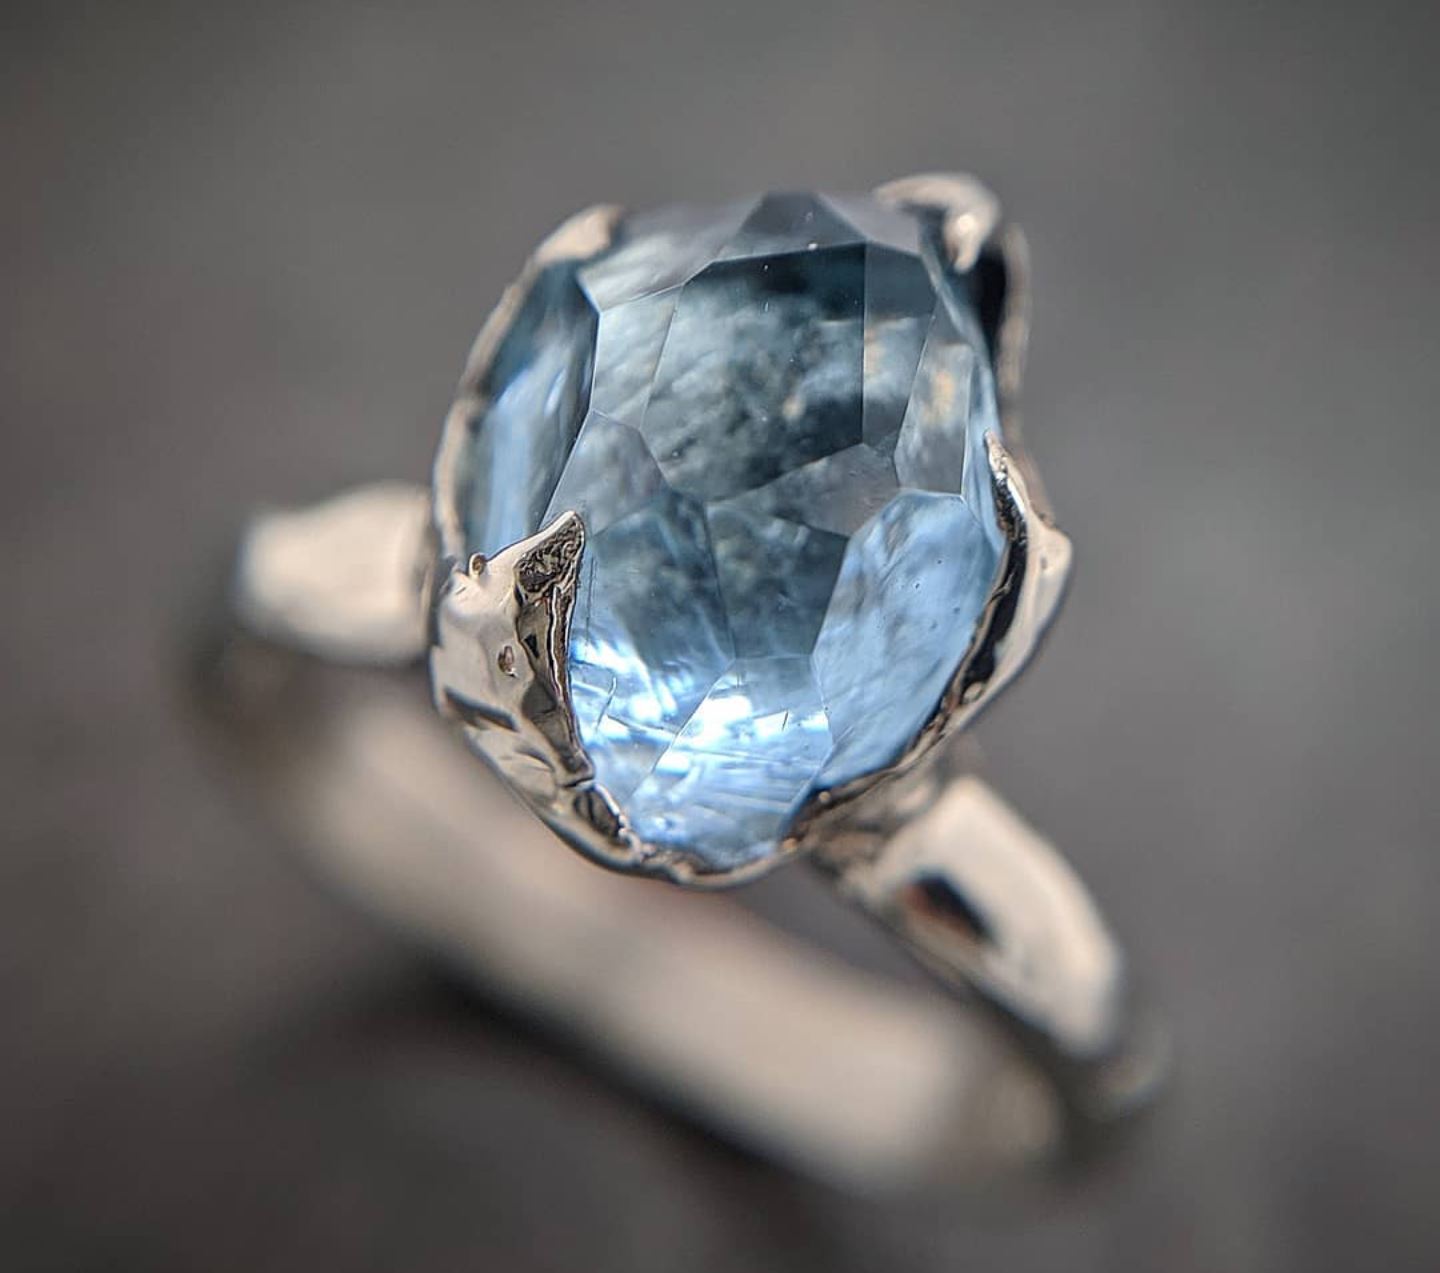 partially faceted aquamarine solitaire ring 14k white gold custom one of a kind gemstone ring bespoke byangeline 1992 Alternative Engagement